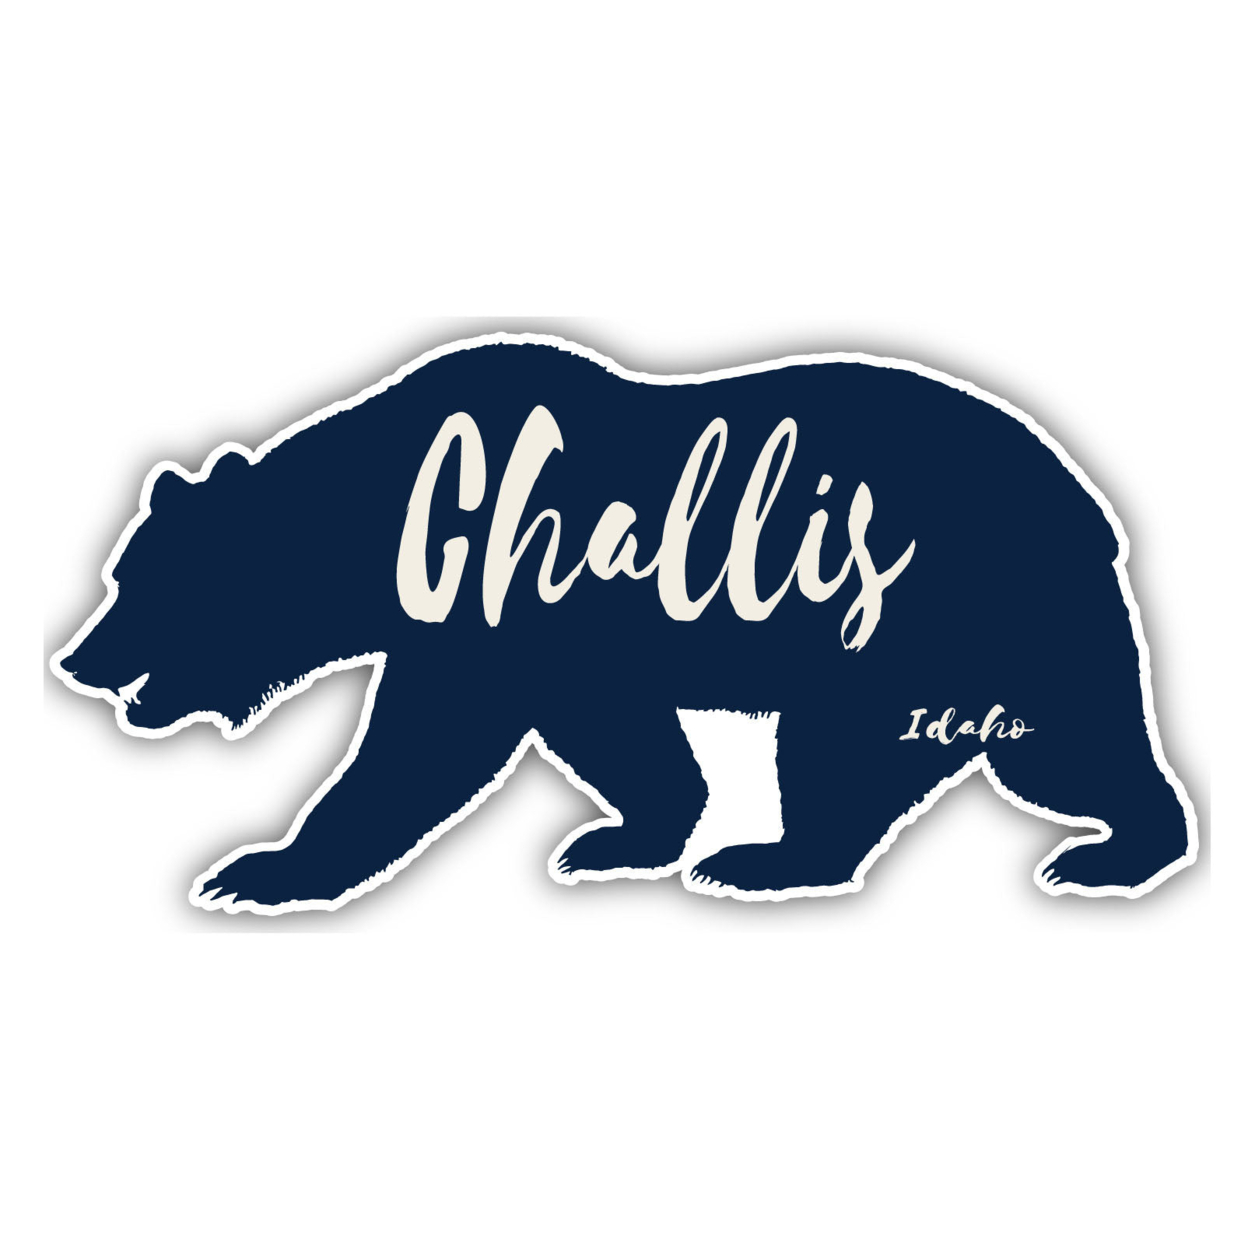 Challis Idaho Souvenir Decorative Stickers (Choose Theme And Size) - 4-Pack, 8-Inch, Tent